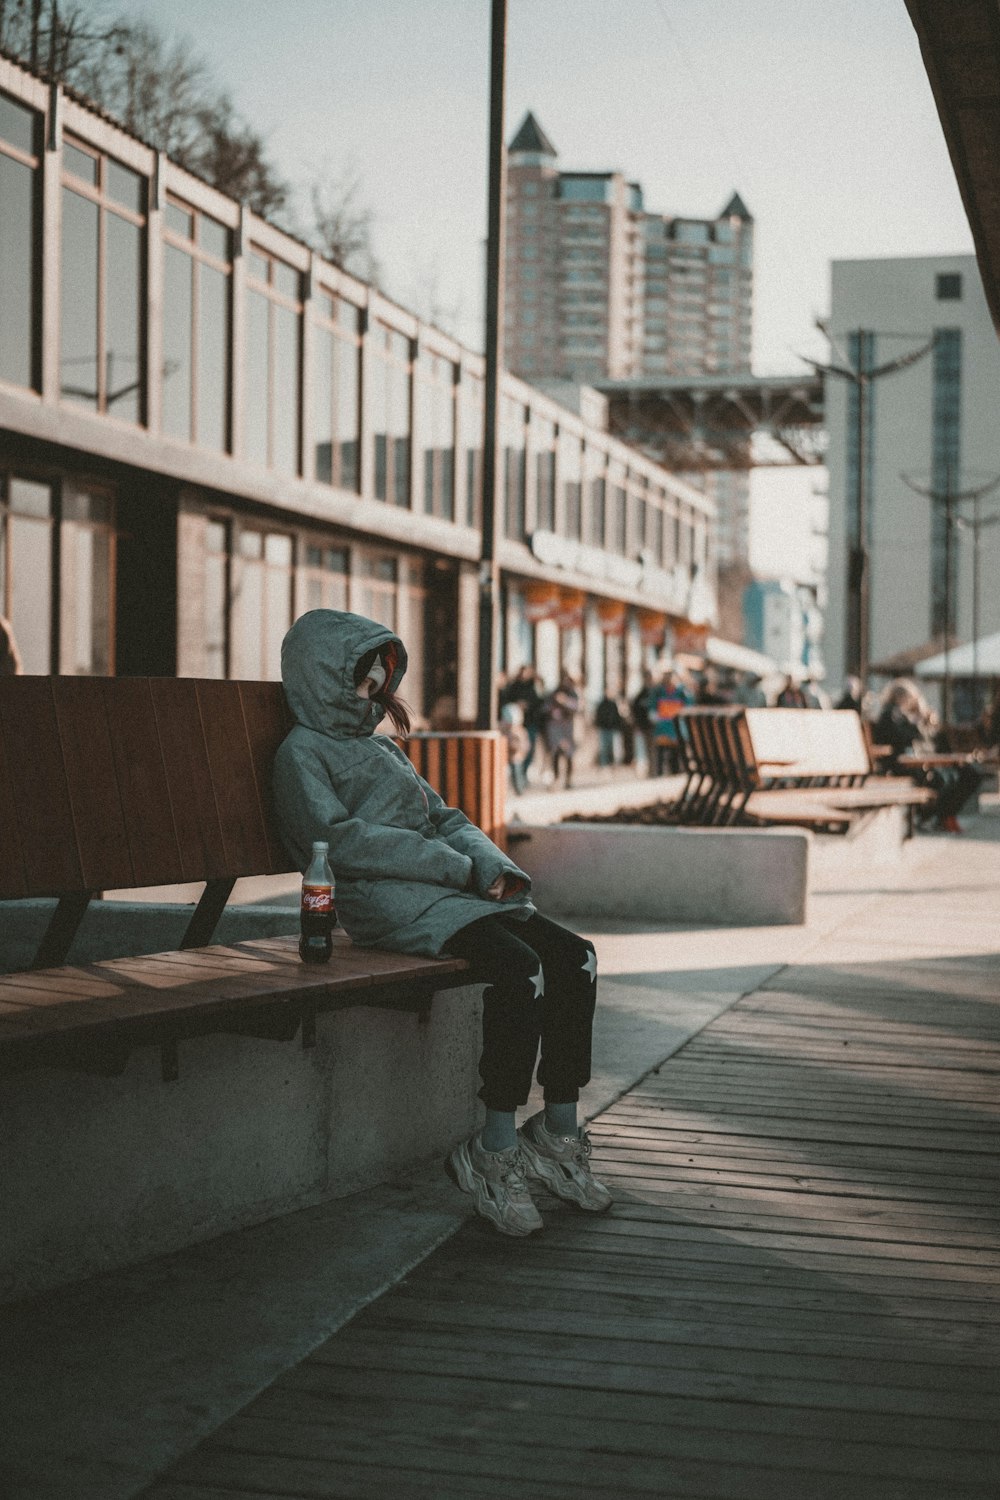 a person sitting on a bench in a city